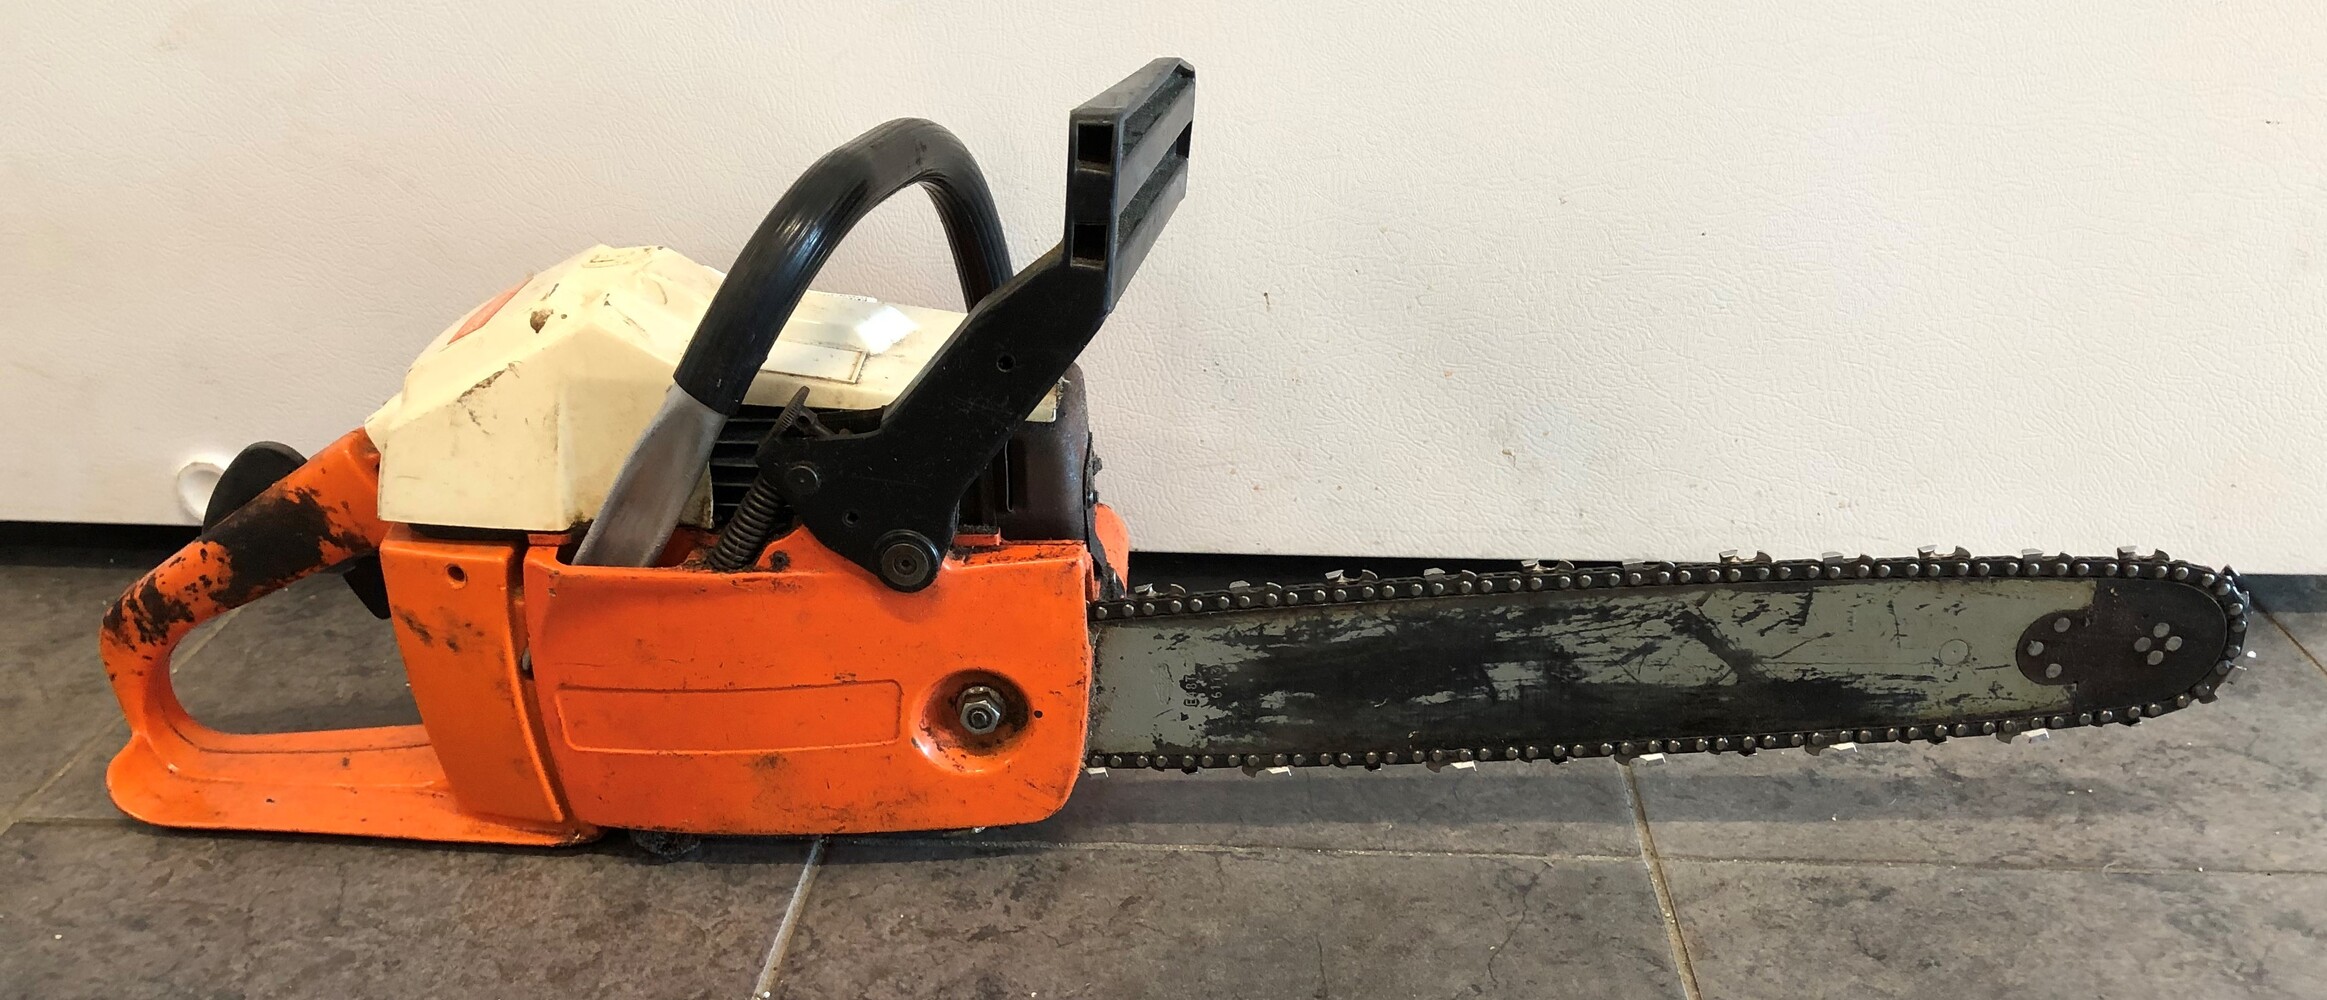 Husqvarna Rancher 44 Gas Powered Chainsaw with 16